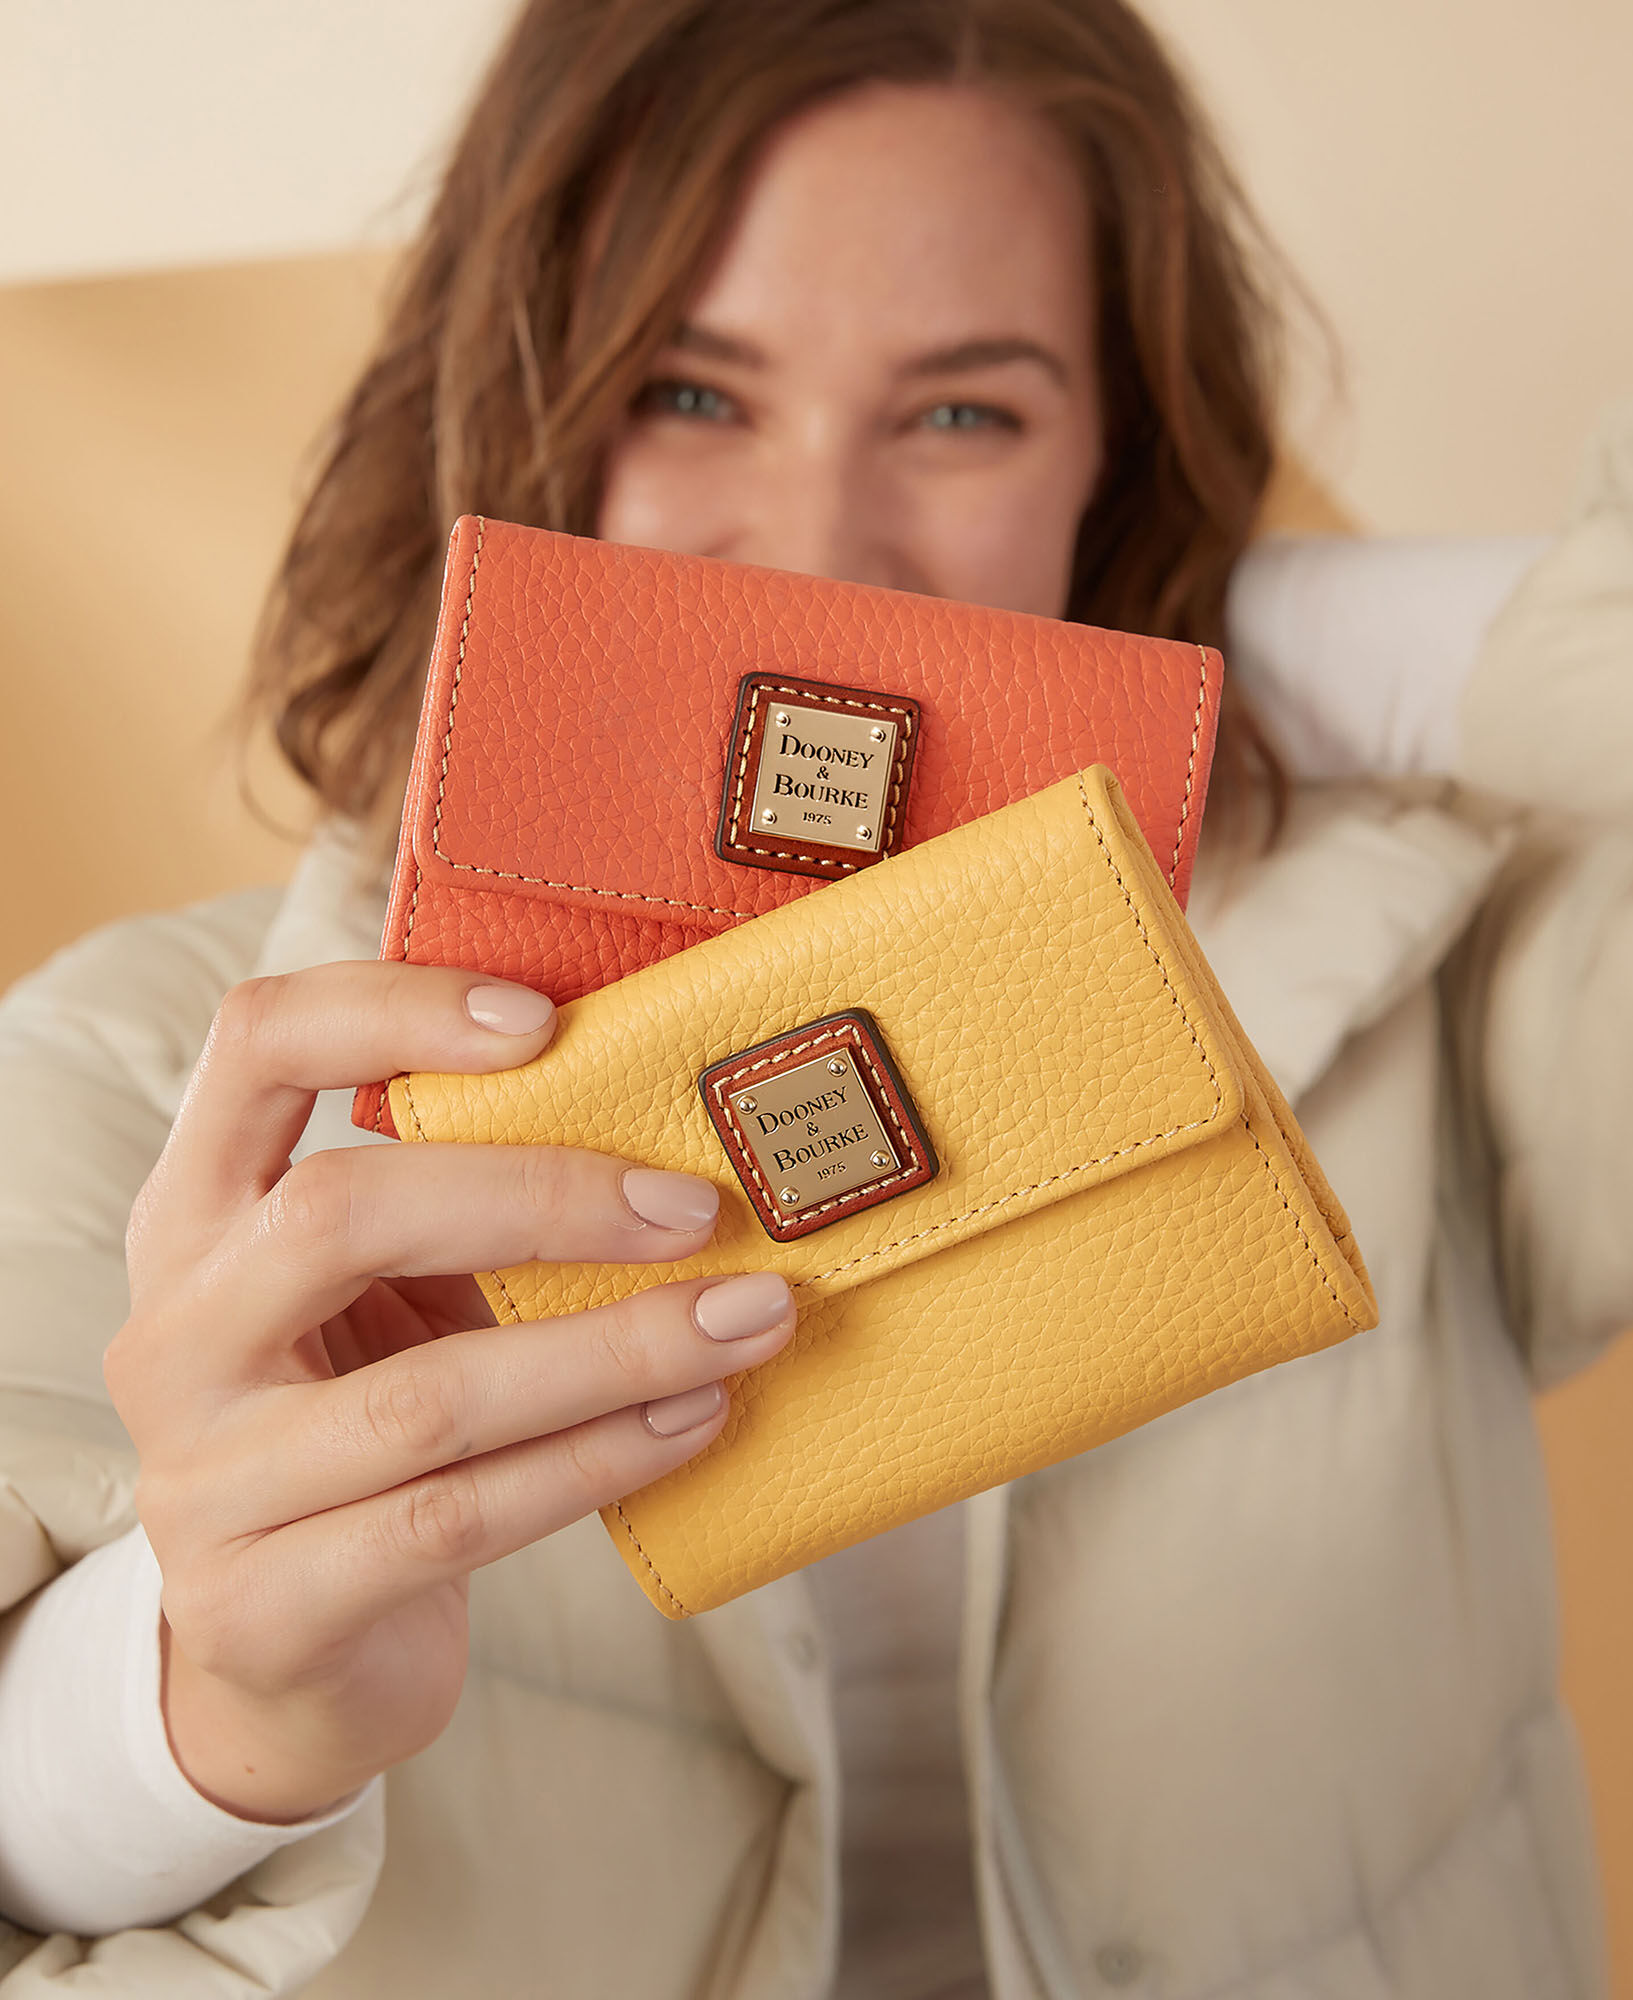 Patent Leather Wallets for Women - Up to 70% off